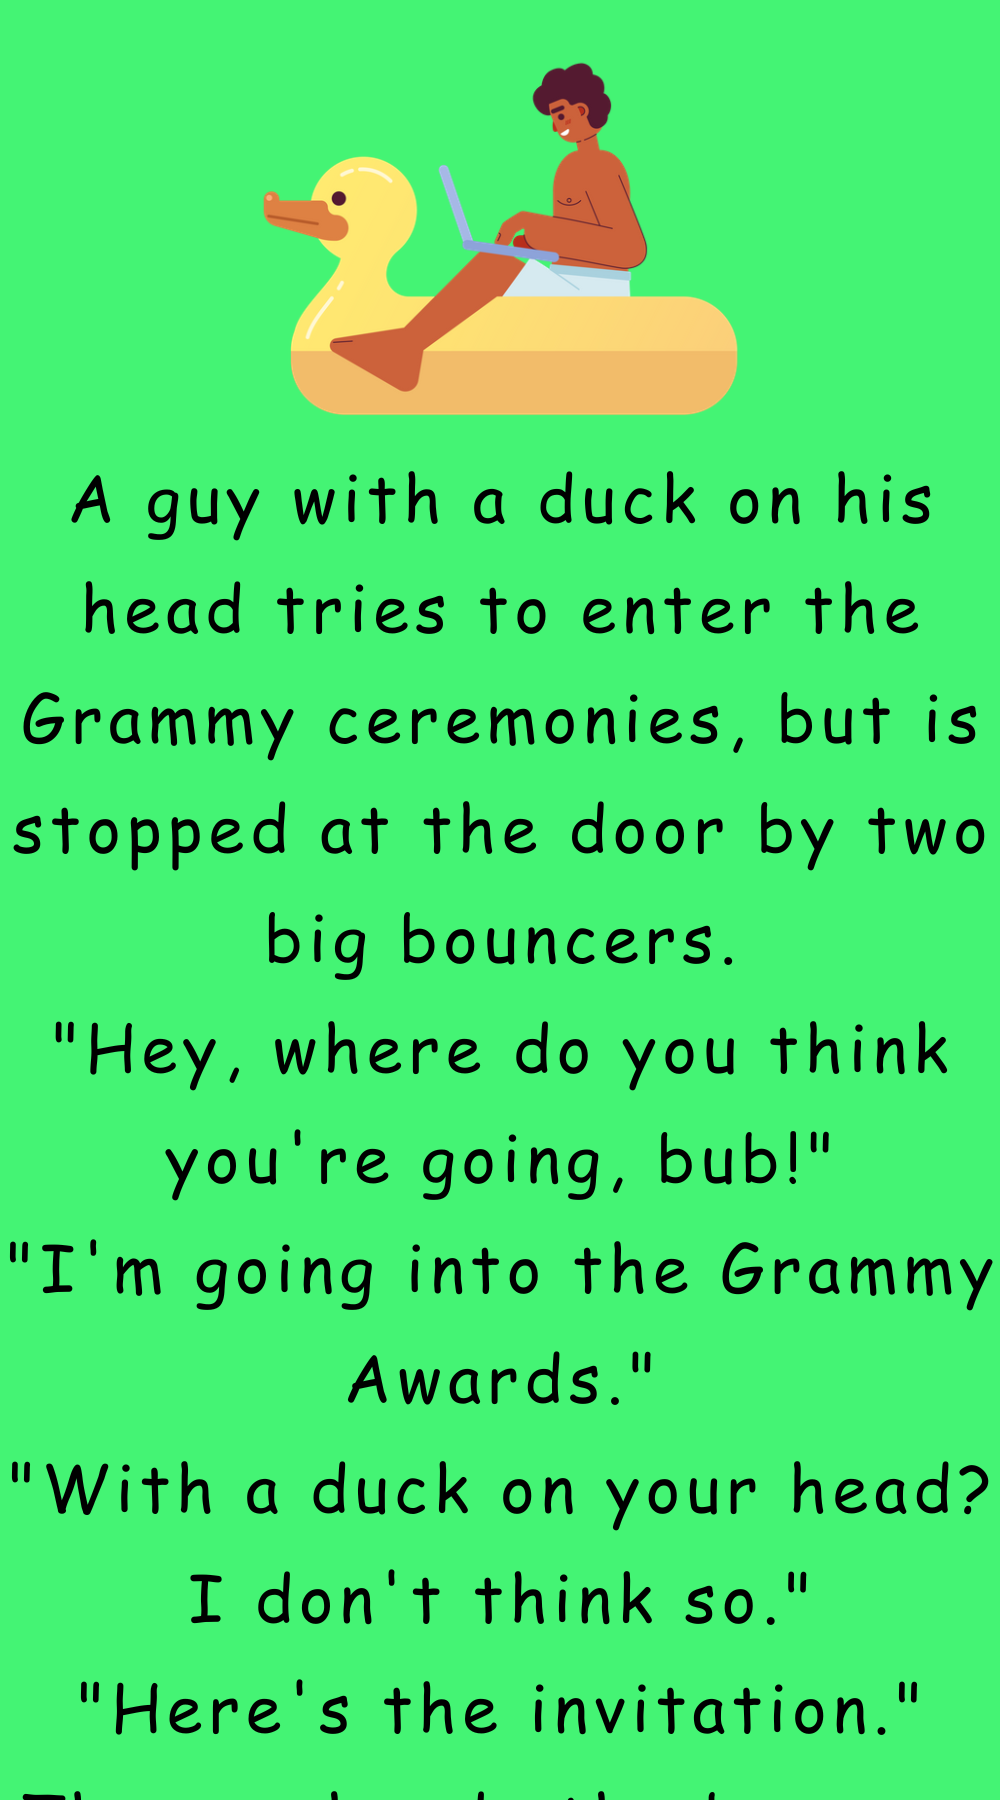 A guy with a duck on his head tries to enter the Grammy 